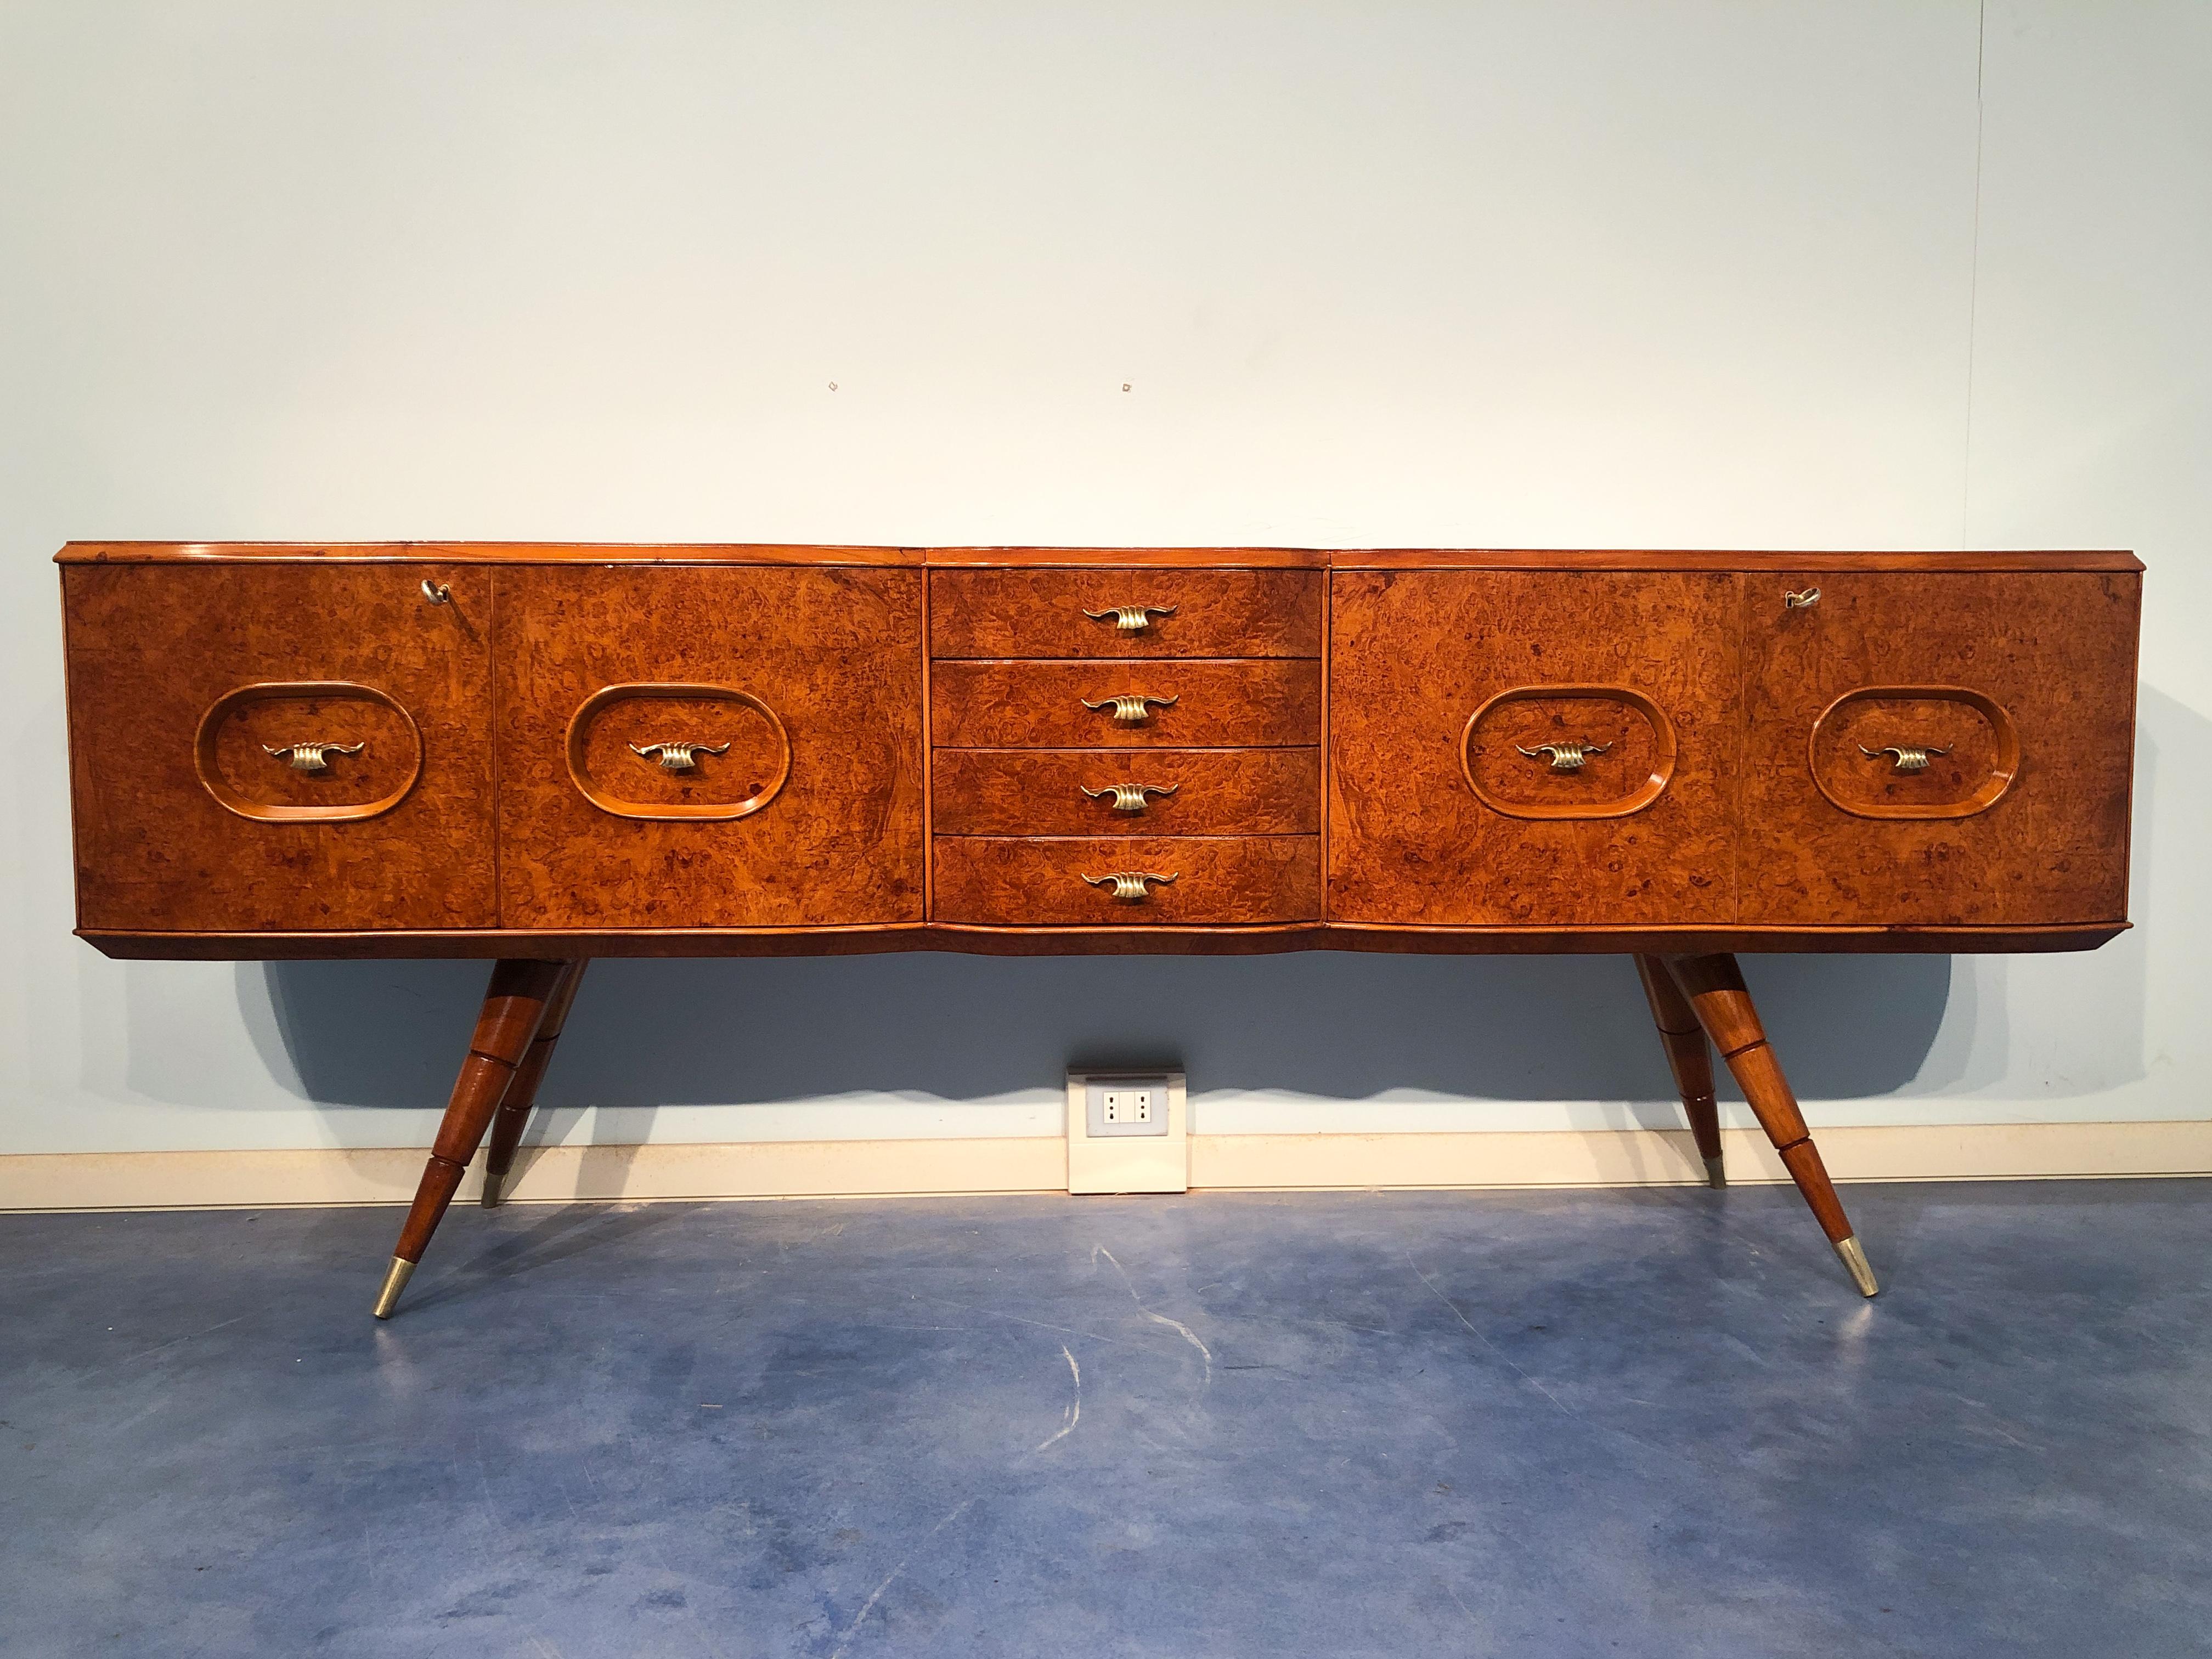 Beautiful Italian mid-century sideboard made of birch wood that gives the sideboard a warm honey color. The sideboard has a shaped front design, as well as rounded sides. It is notable also for the spiked feet, finishing in a brass sabot. The